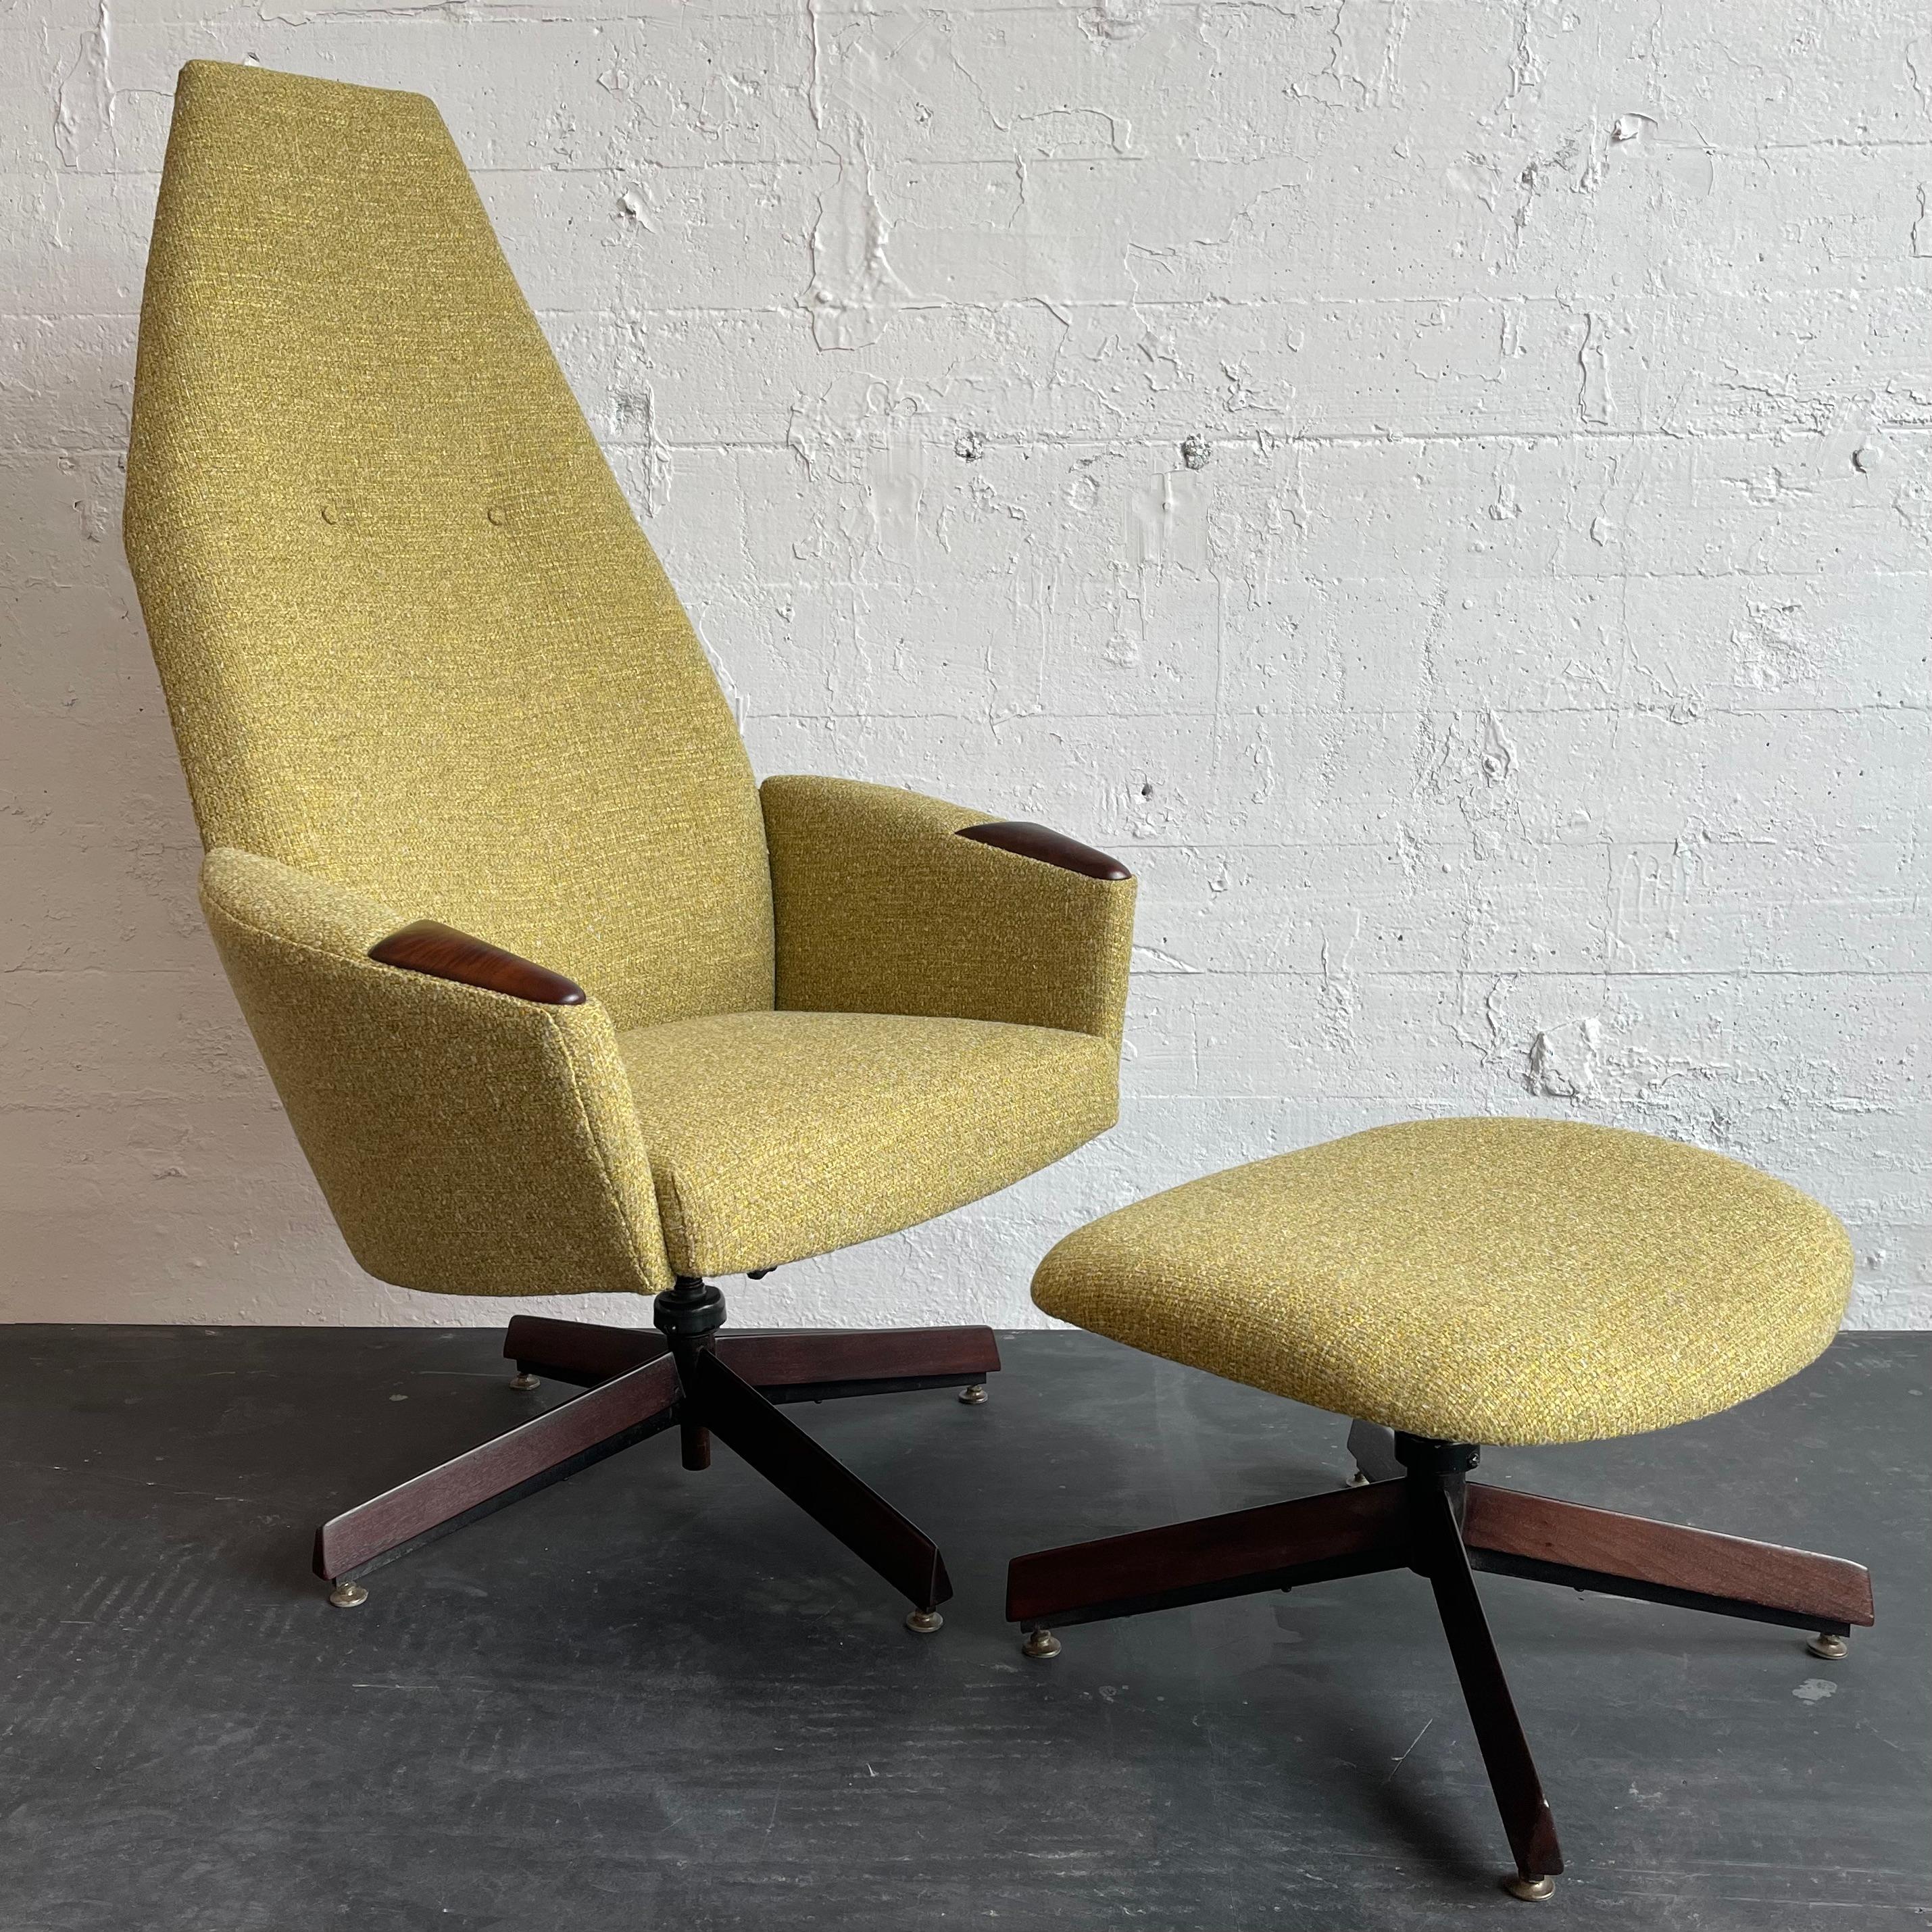 Mid-Century Modern, model 2174-C, lounge chair and ottoman set by Adrian Pearsall for Craft Associates features a fully upholstered, high-back, sculpted silhouette with walnut armrests and walnut 4 prong bases. The chair and ottoman swivel and both